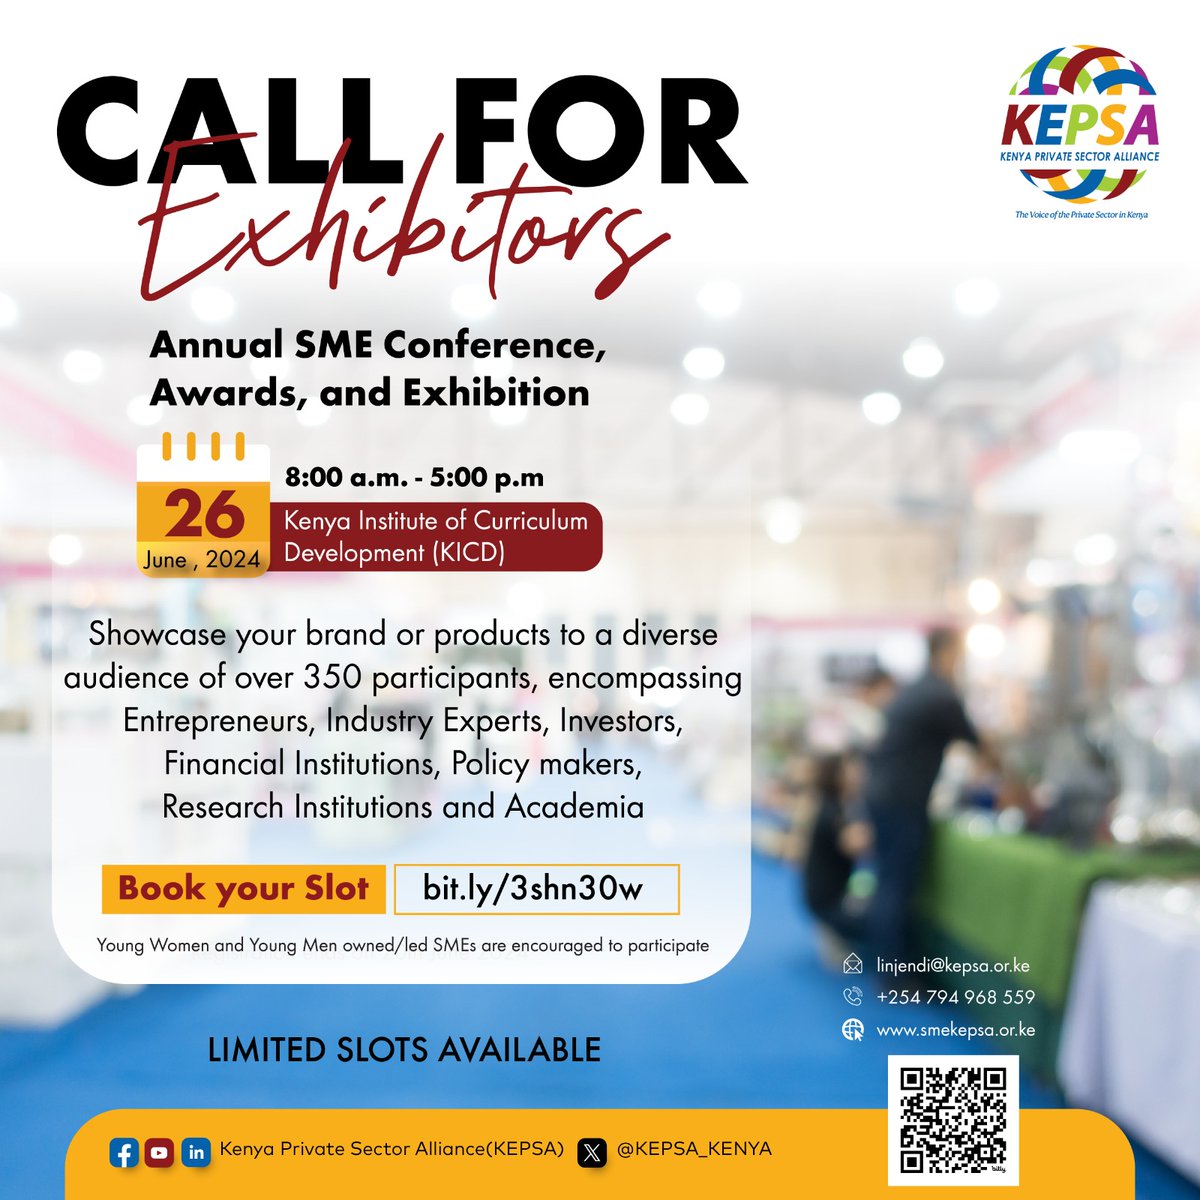 🚀 Call for Exhibitors! Showcase your business at the SME Conference, Awards & Exhibition 2024! Maximize your visibility. When: June 26, 2024 Where: Kenya Institute of Curriculum Development (KICD) To participate, reserve your space today at bit.ly/3shn30w